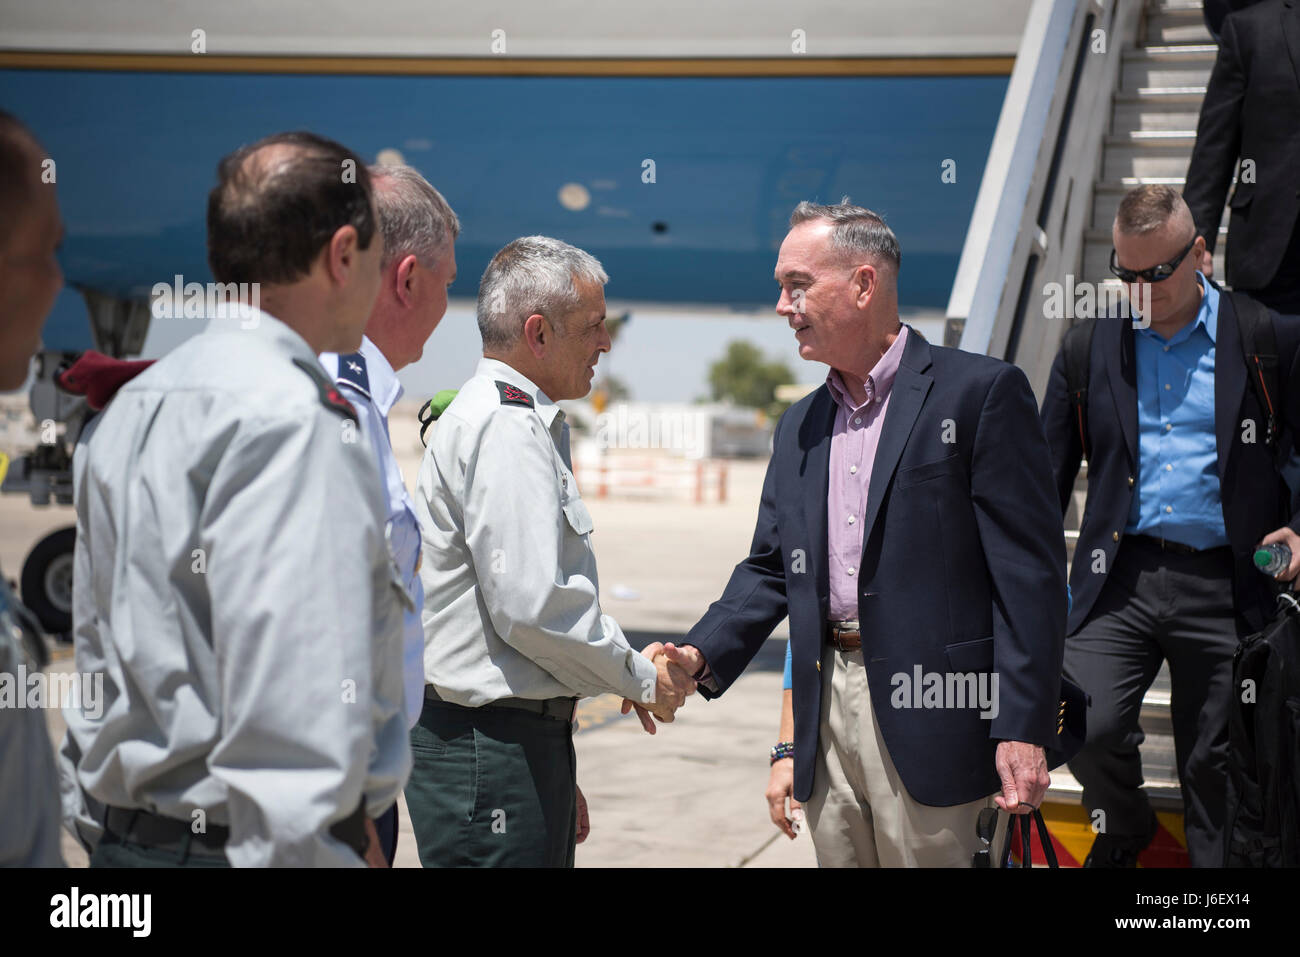 Marine Corps Gen. Joseph F. Dunford Jr., chairman of the Joint Chiefs of Staff, greets Israeli Maj. Gen. Mickey Edelstein after he arrives in Tel Aviv, Israel May 8, 2017. (Dept. of Defense photo by Navy Petty Officer 2nd Class Dominique A. Pineiro/Released) Stock Photo